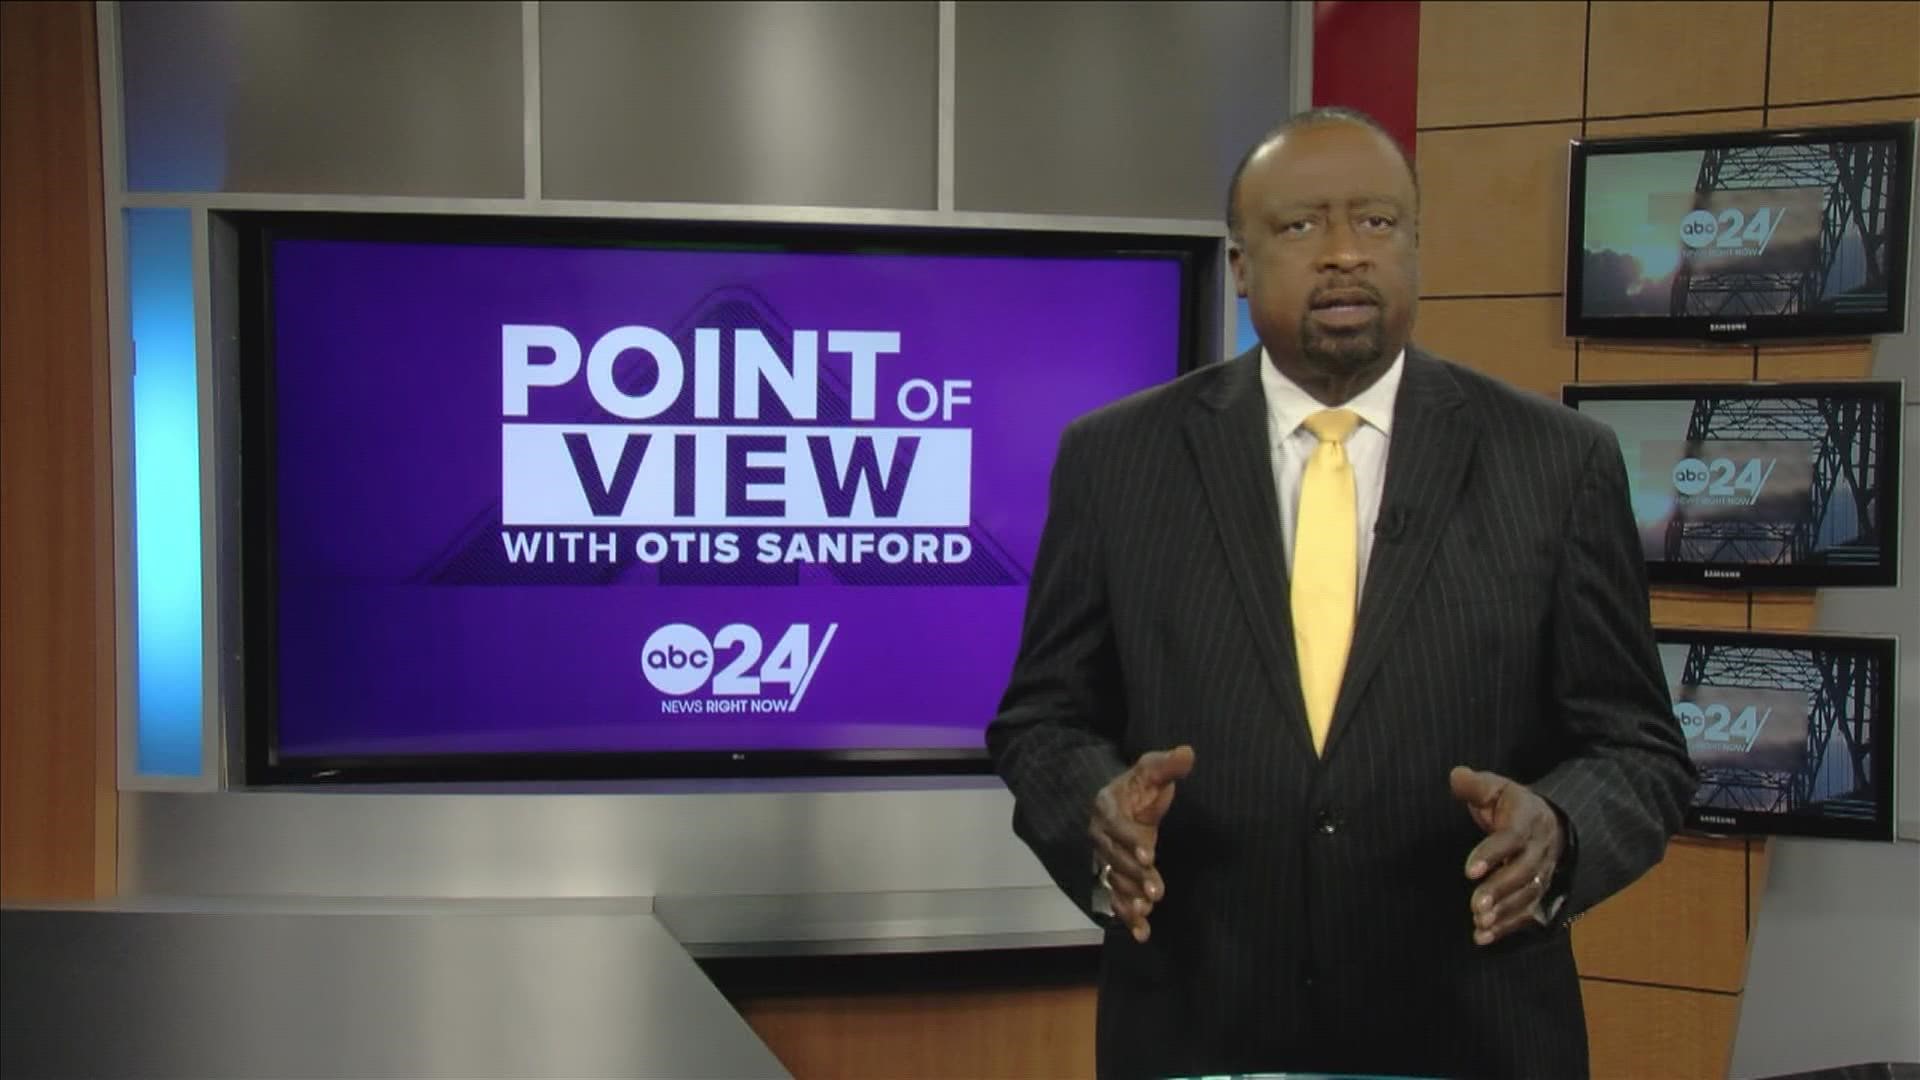 ABC24 political analyst and commentator Otis Sanford shared his point of view on the latest mass school shooting in Texas.